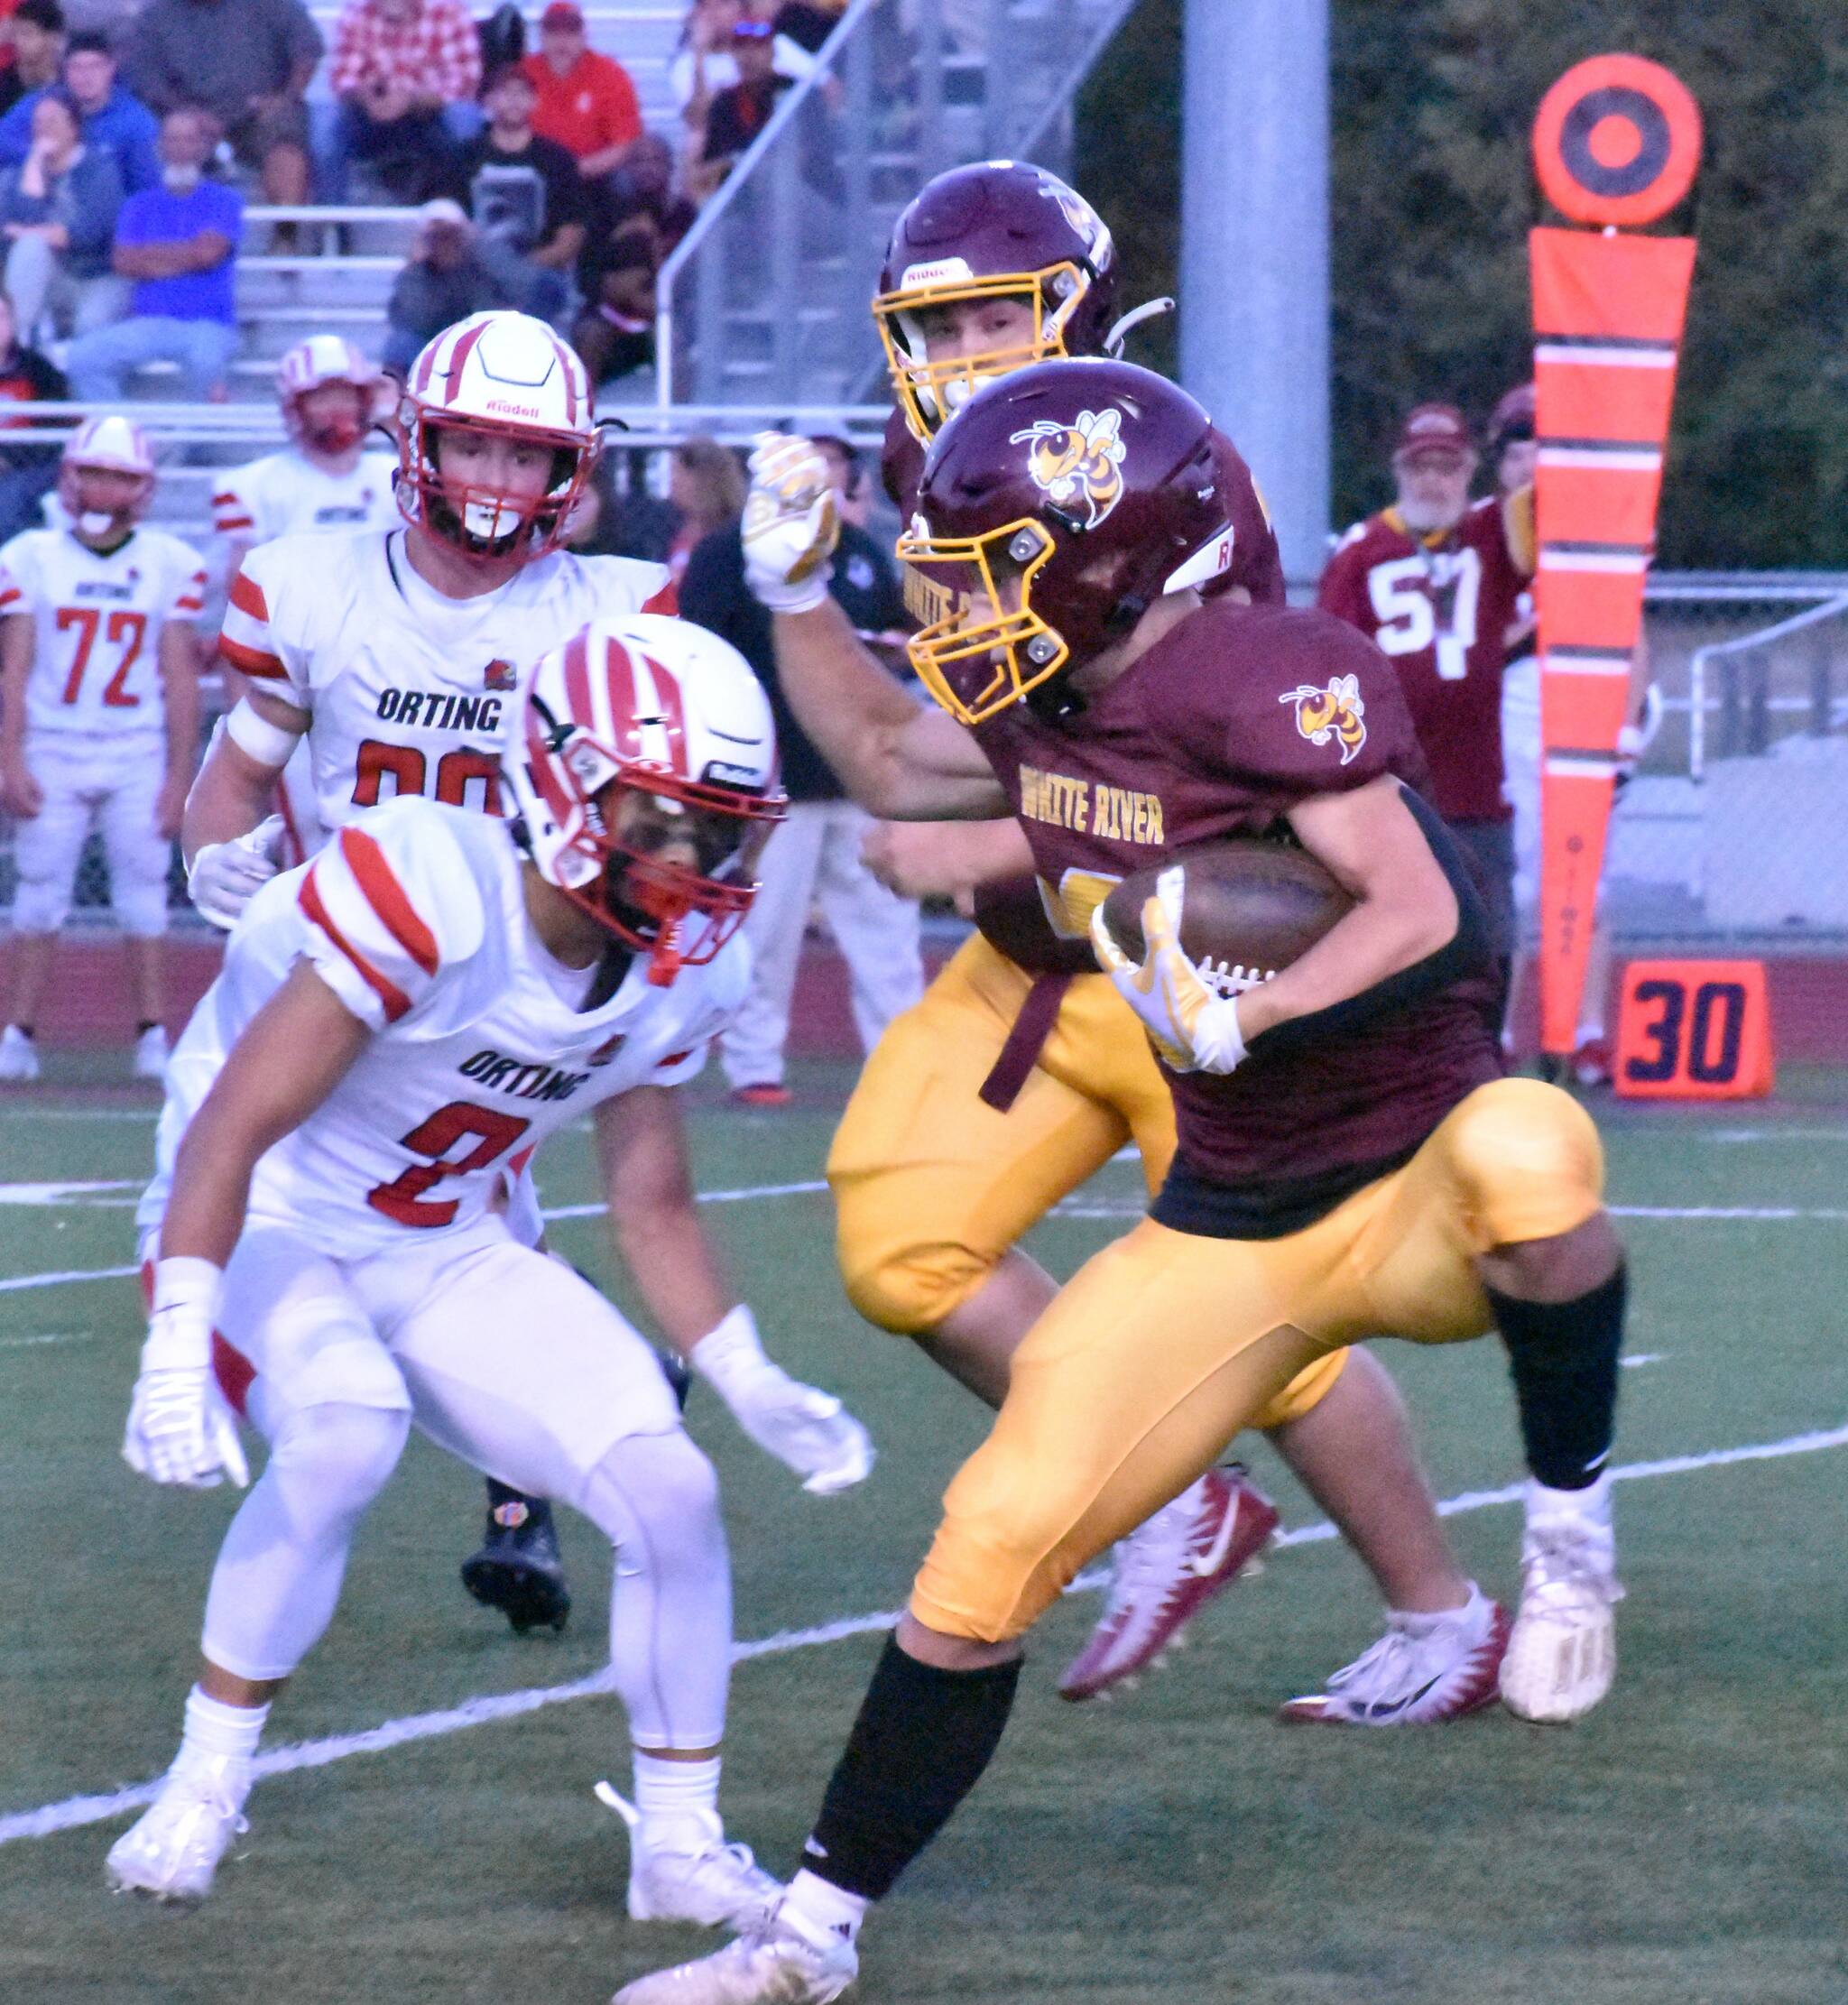 During White River’s Thursday home game, Hornet running back Tate Bowen attempts to elude a Cardinal defender. (Photo by Kevin Hanson)